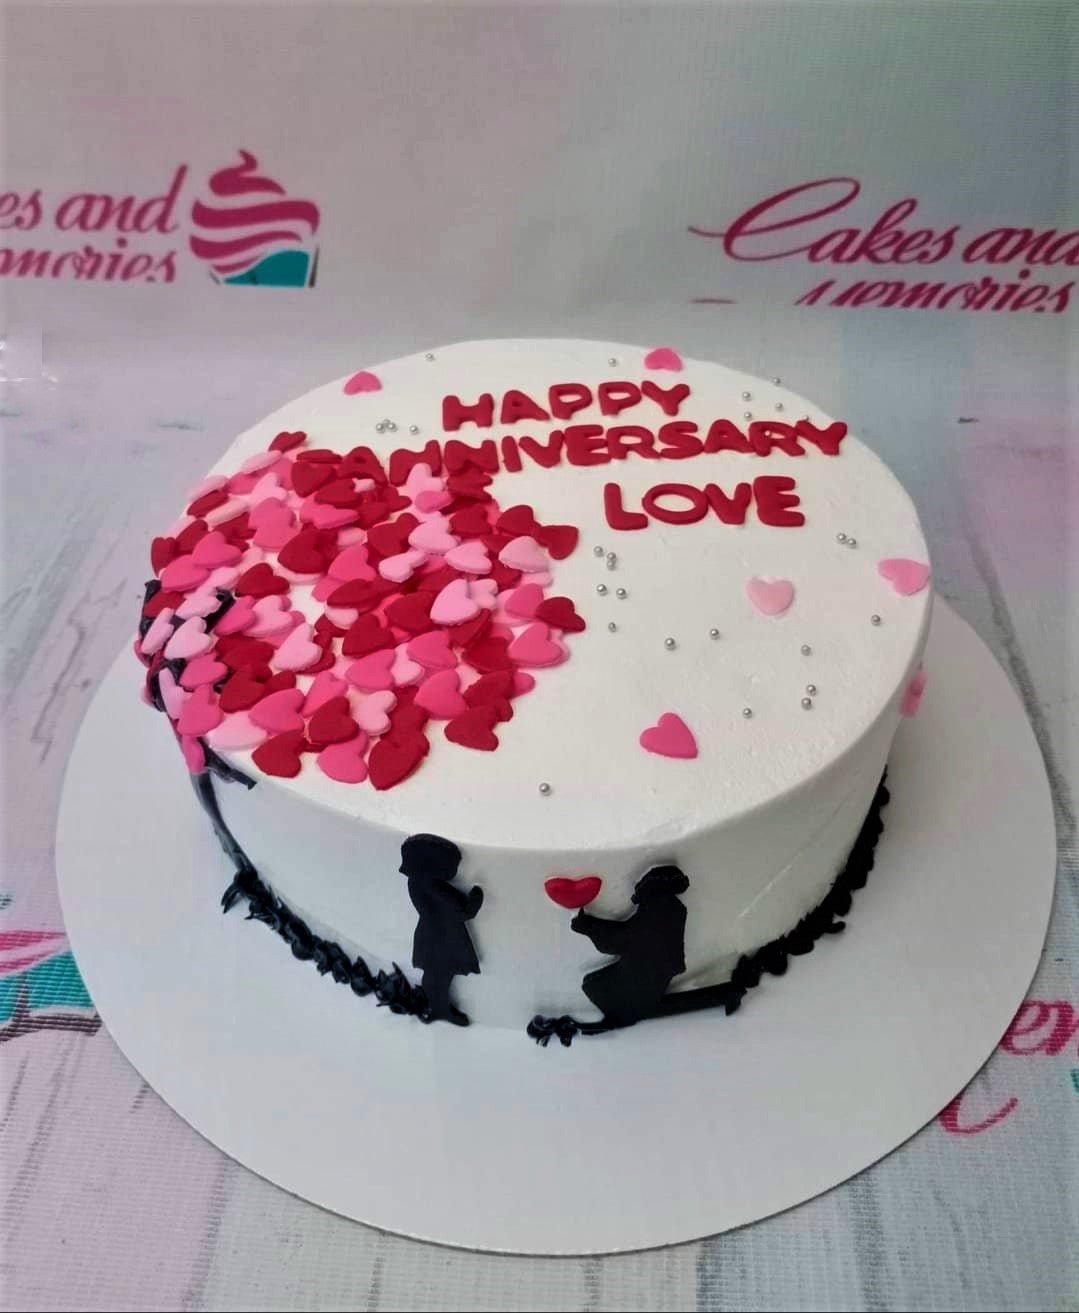 Love Cake - 1001 – Cakes and Memories Bakeshop